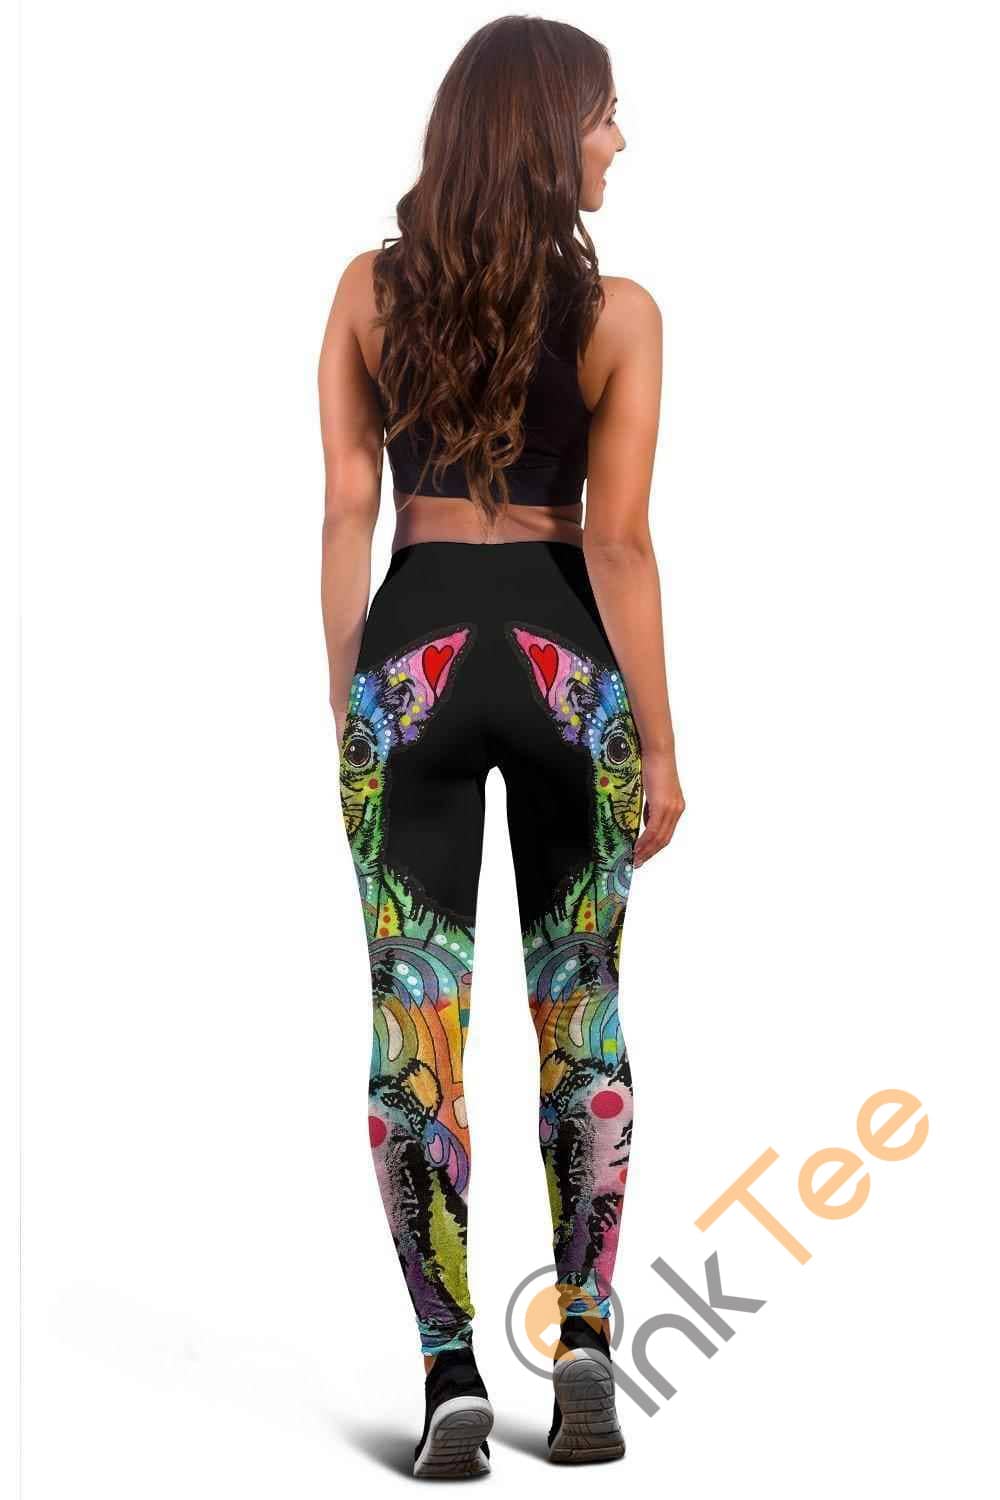 Inktee Store - Chihuahua 3D All Over Print For Yoga Fitness Women'S Leggings Image